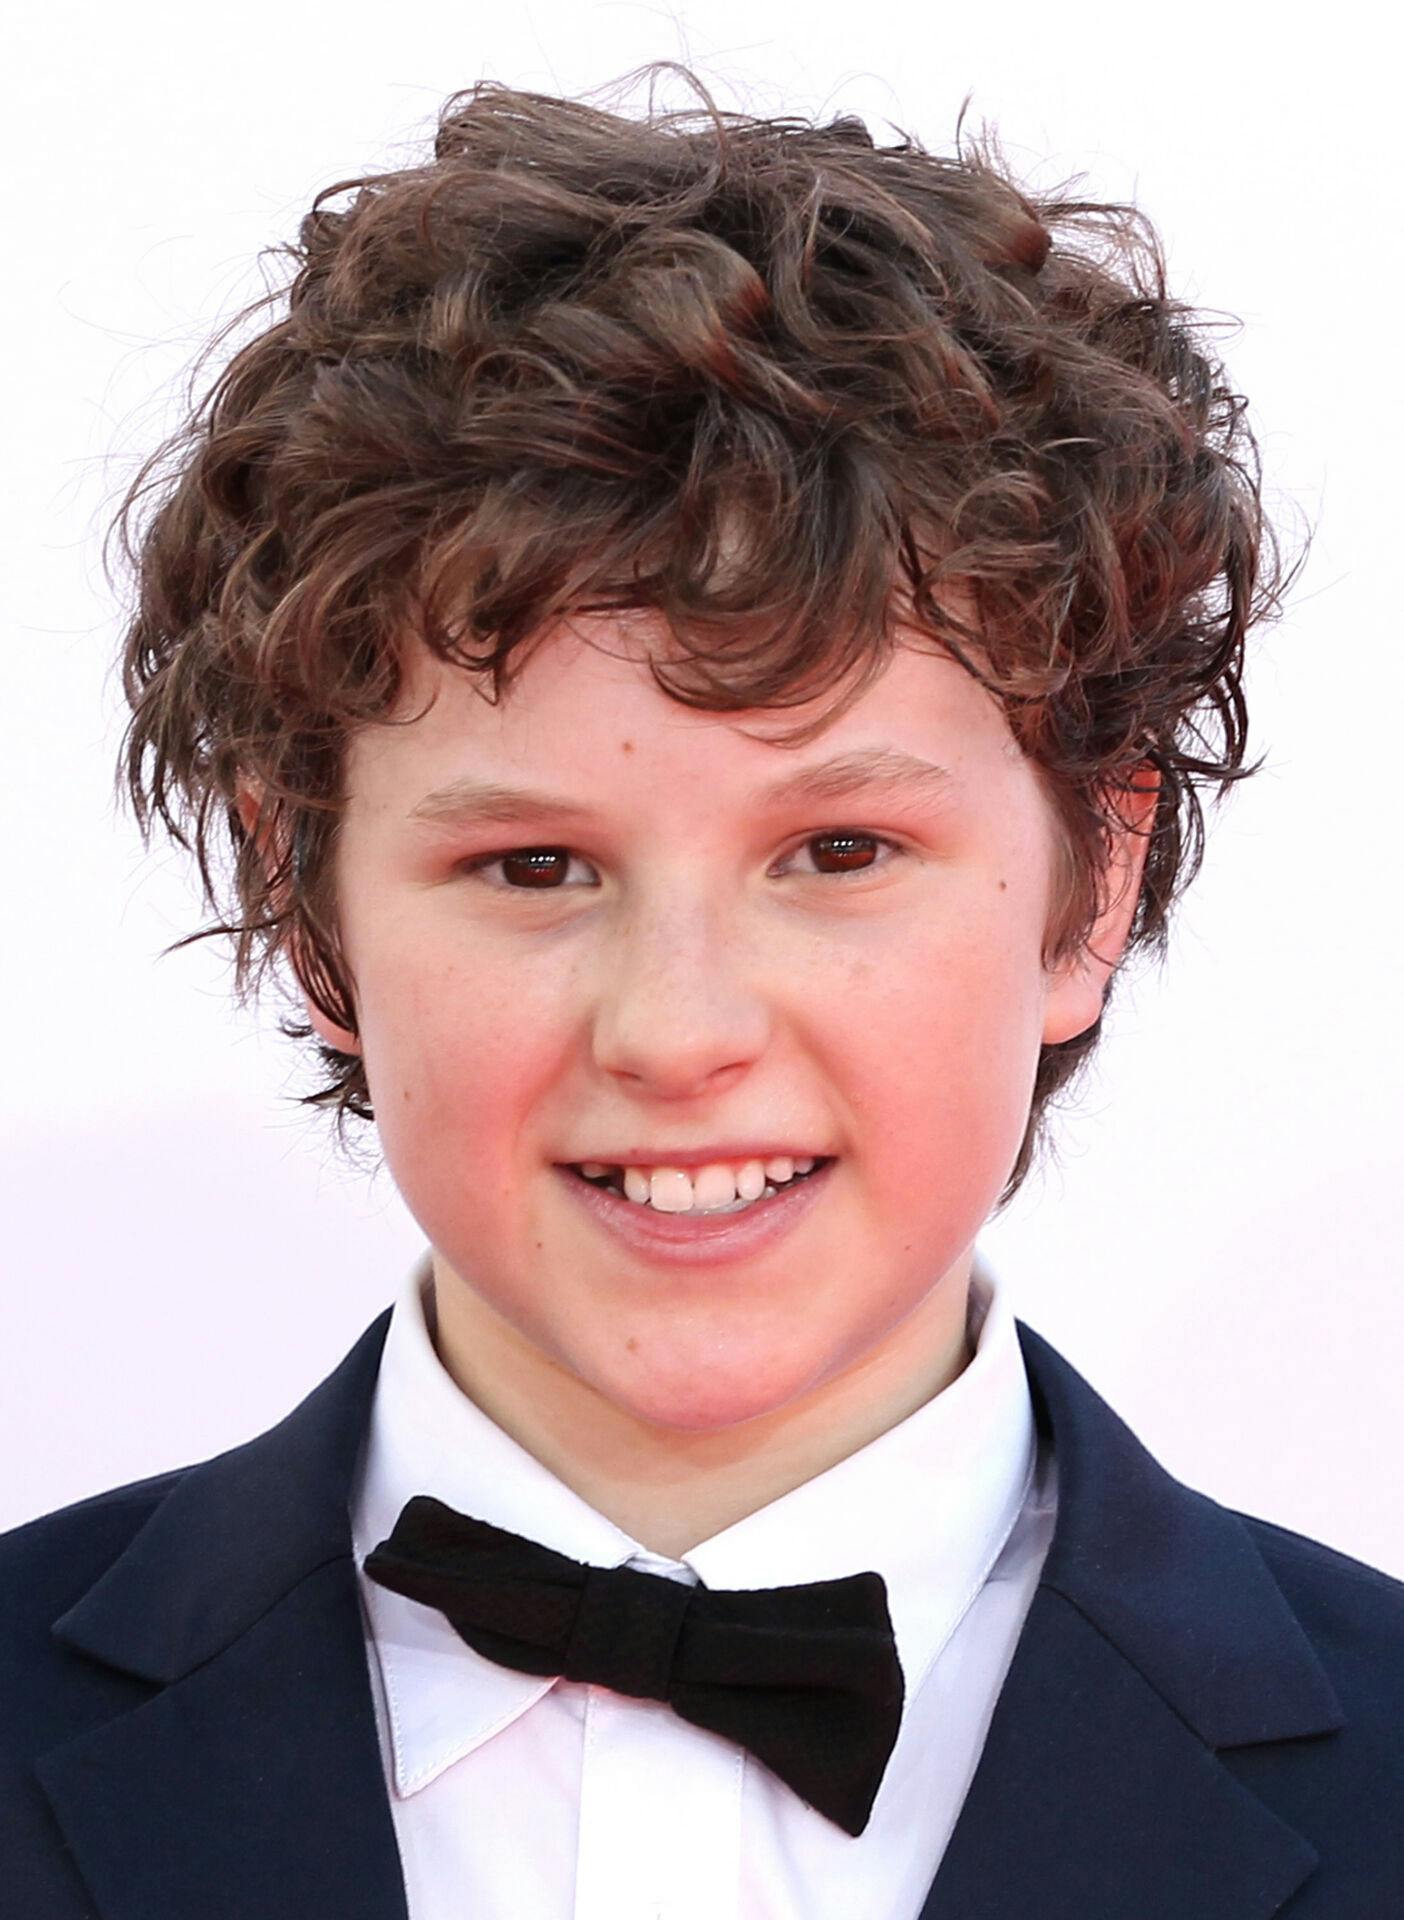 Actress Nolan Gould arrives at the 64th Primetime Emmy Awards at the Nokia Theatre on Sunday, Sept. 23, 2012, in Los Angeles. (Photo by Matt Sayles/Invision/AP)